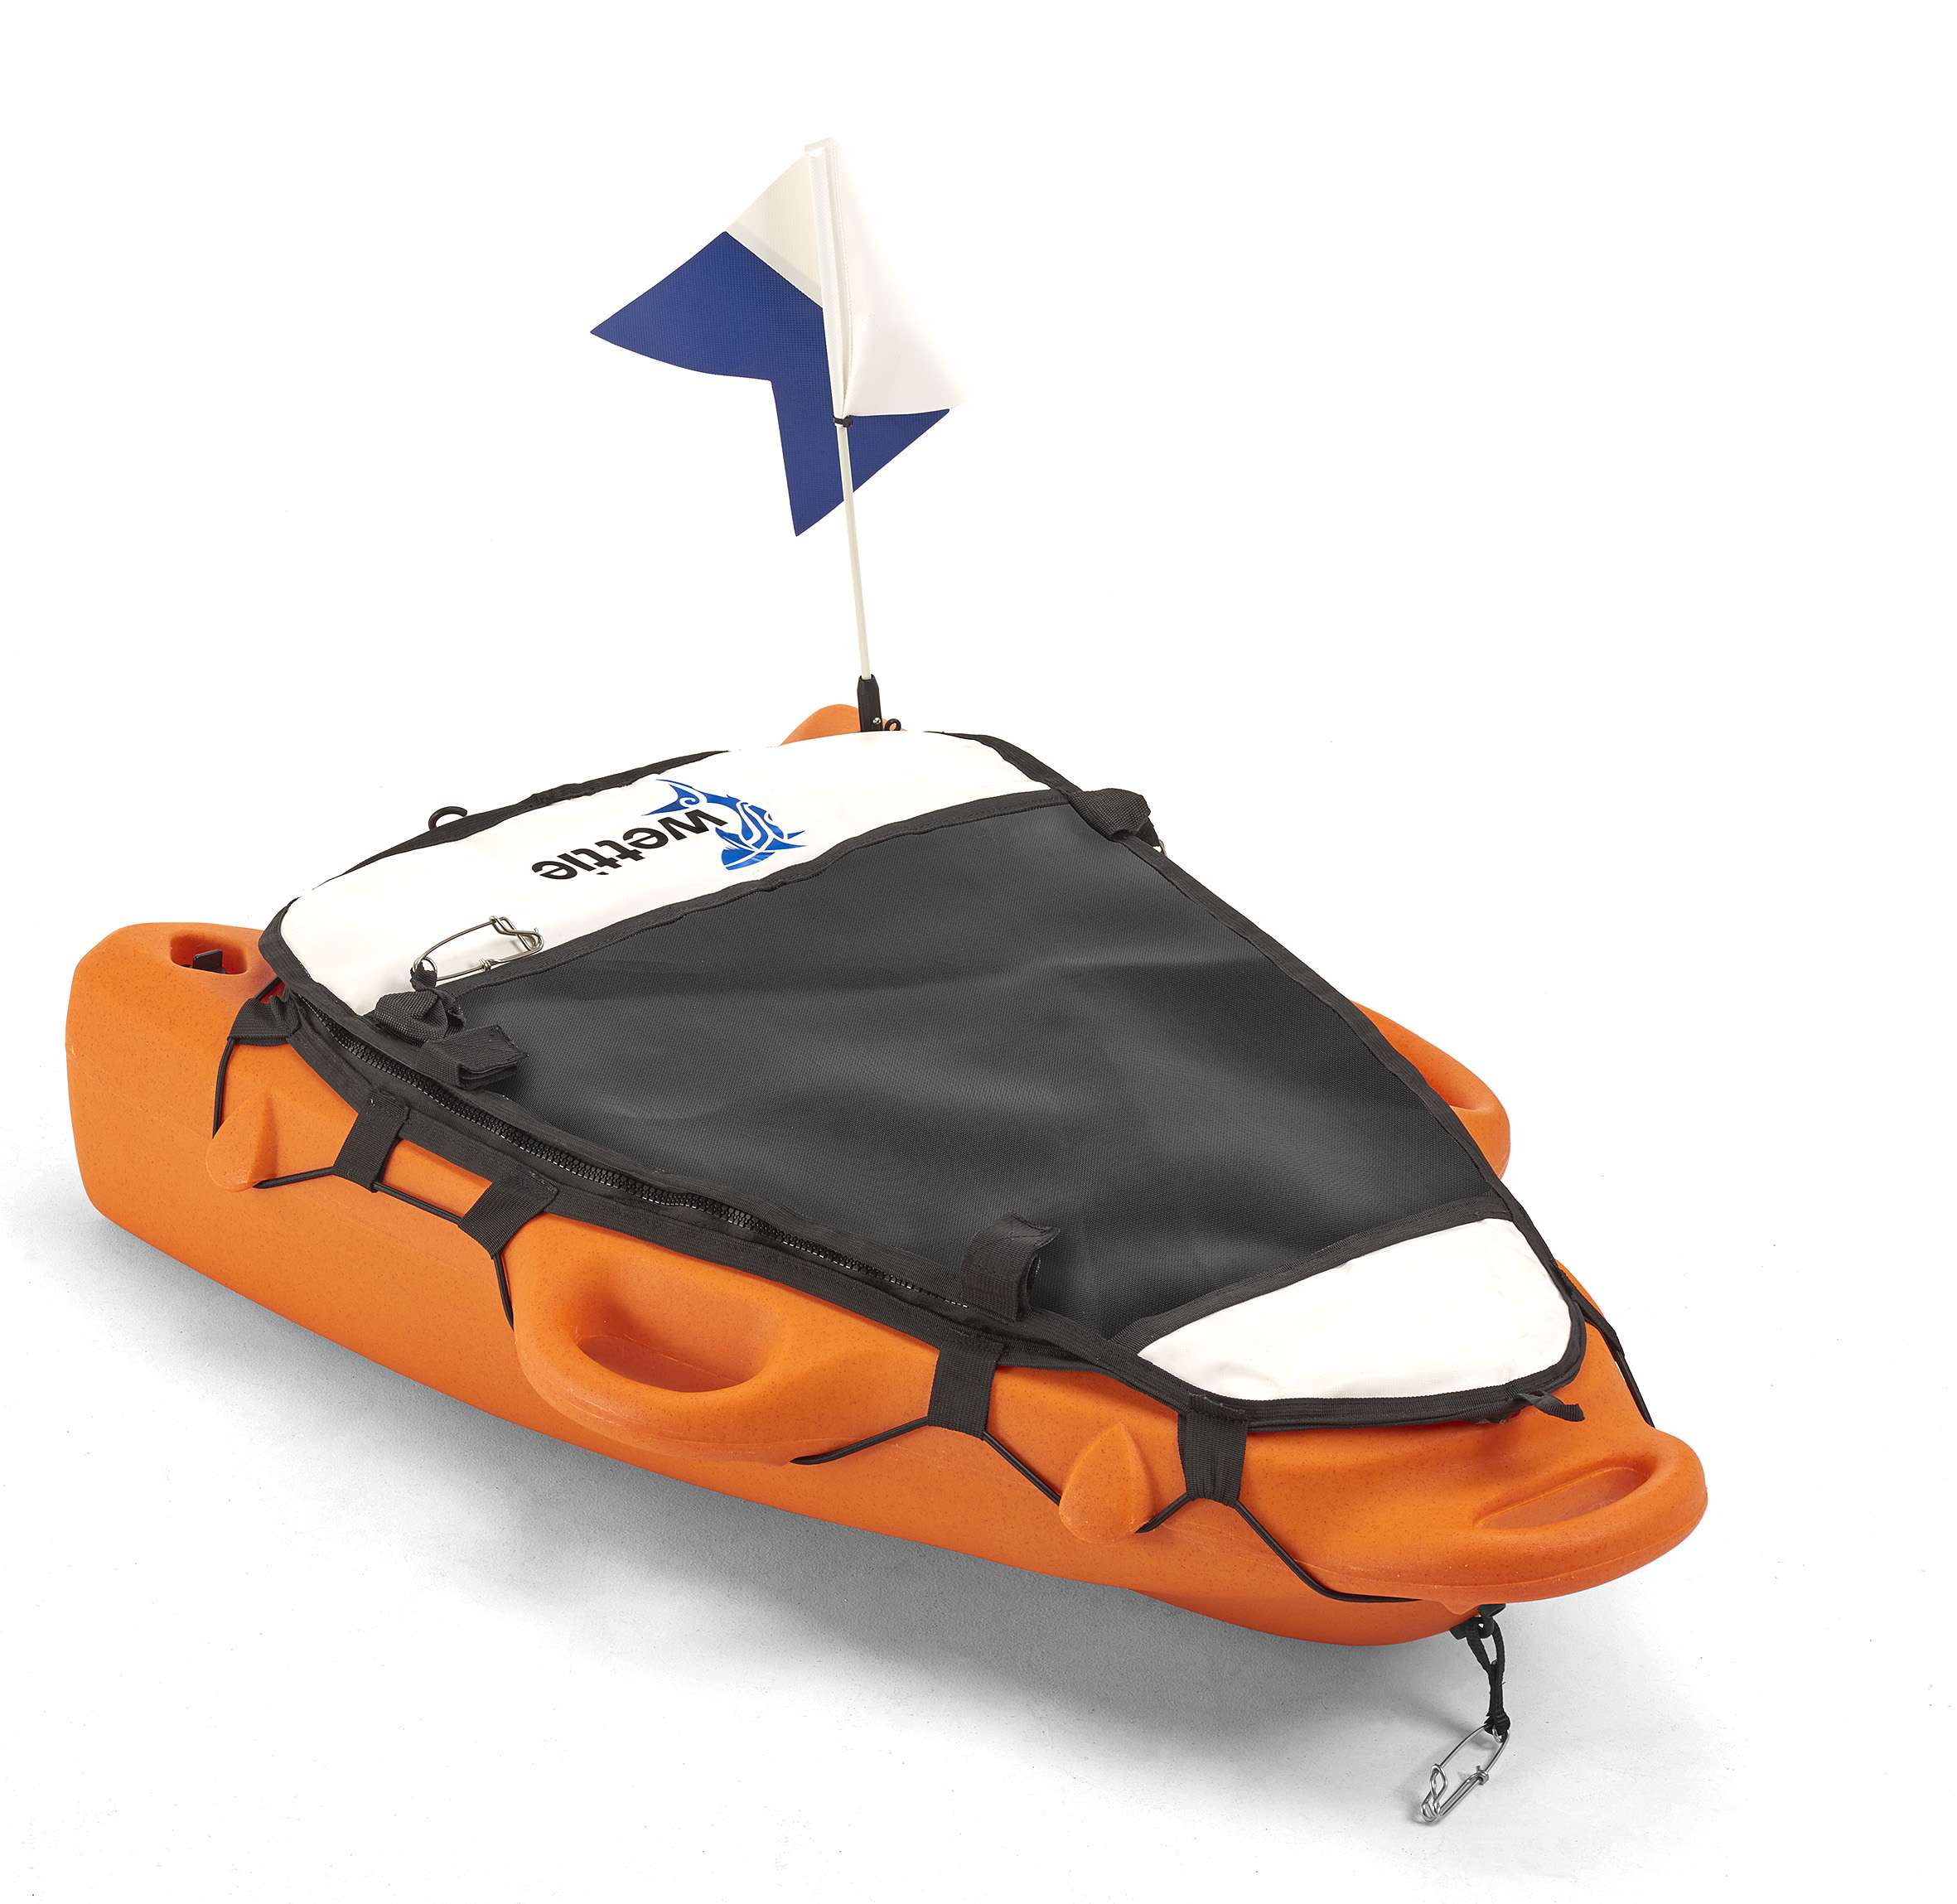 Wettie Float Boat and Chill Bag Combo (Large)